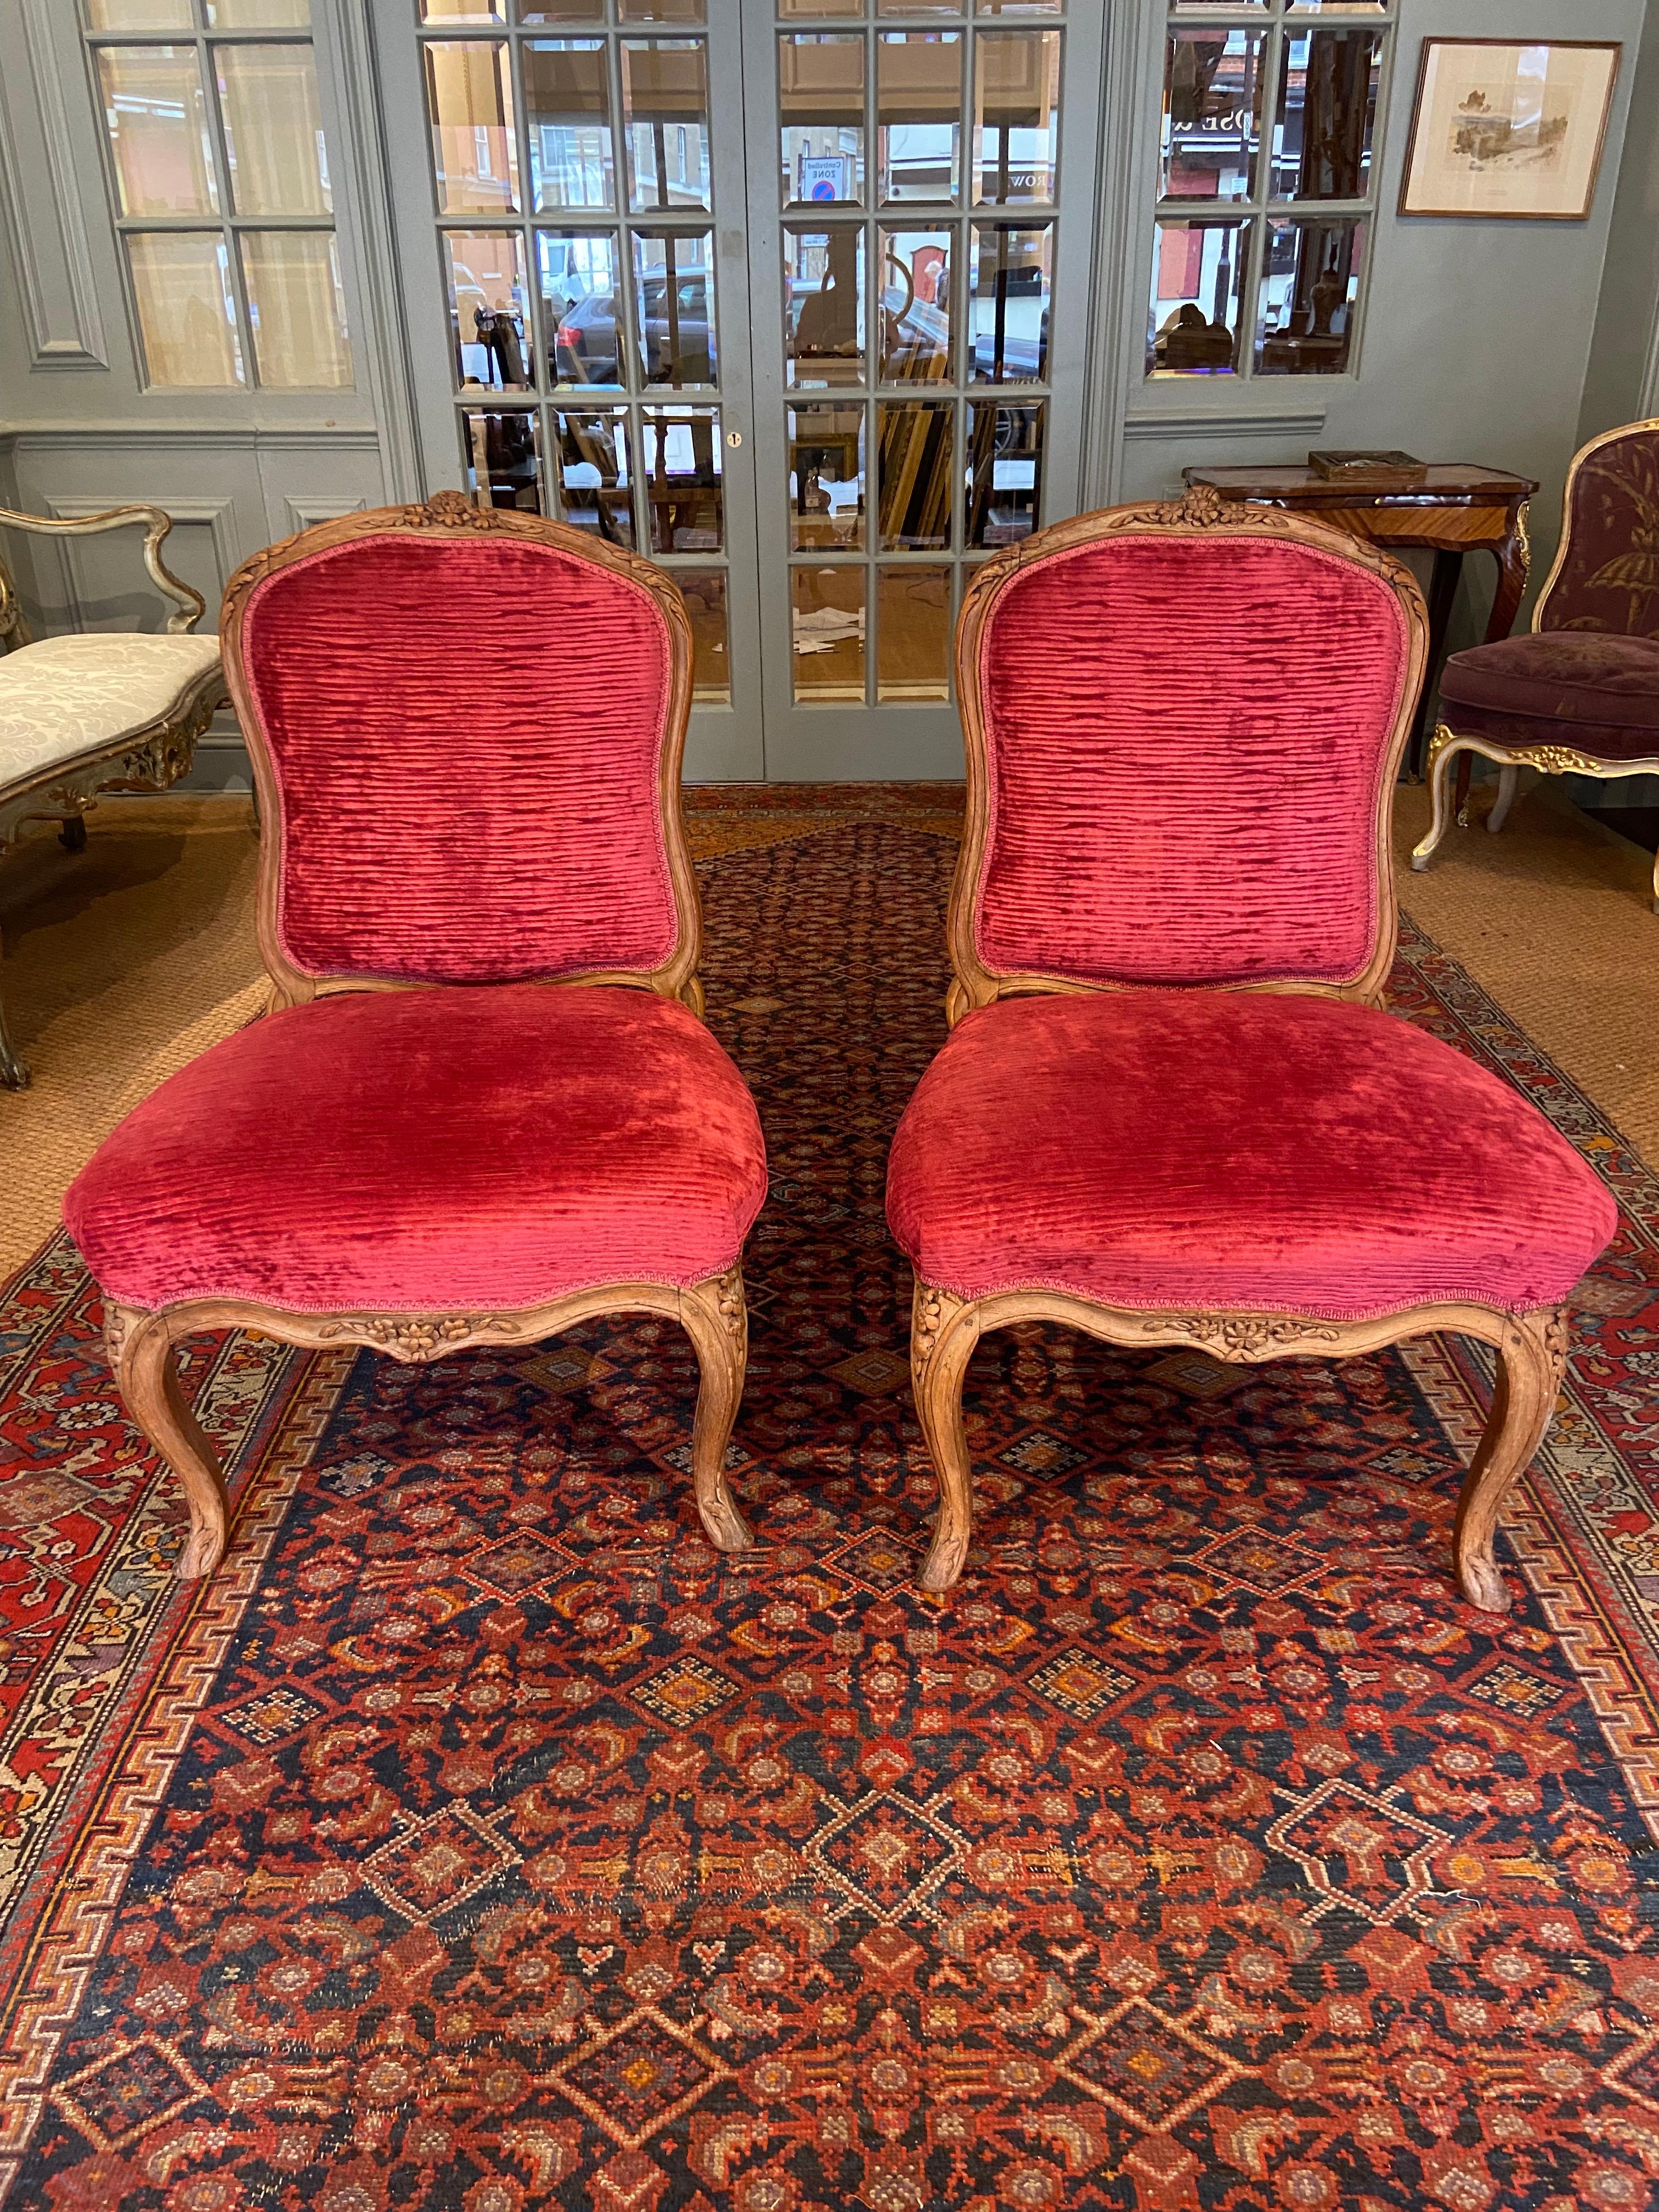 A Pair of Period Louis XV Beechwood Salon Chairs (Mid 18th Century).